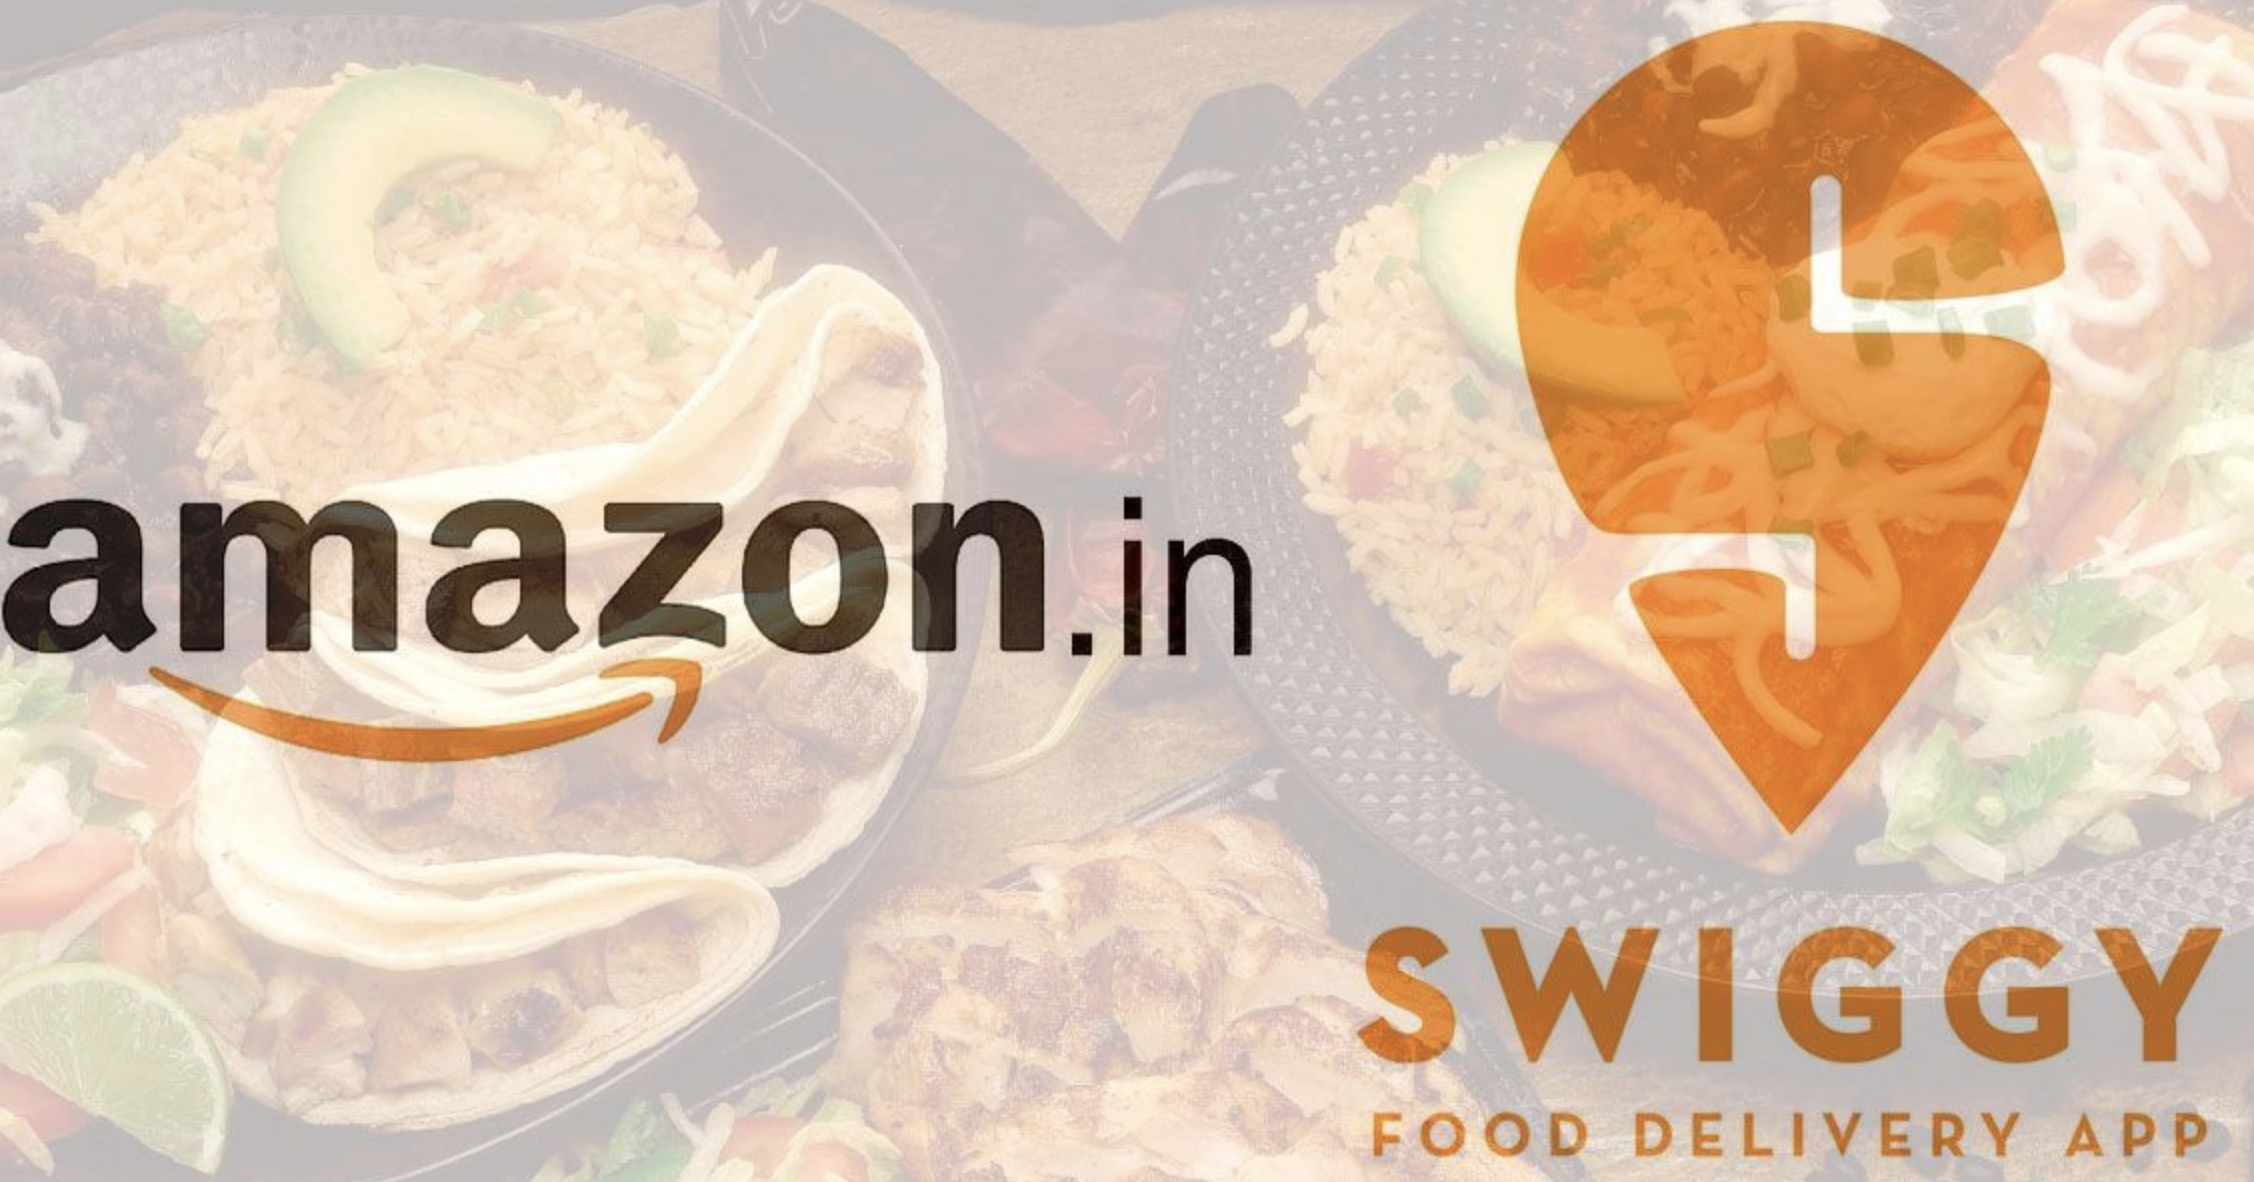 3 Reasons Why Amazon Can Buy Swiggy's Quick Commerce Business For $10-12 Billion